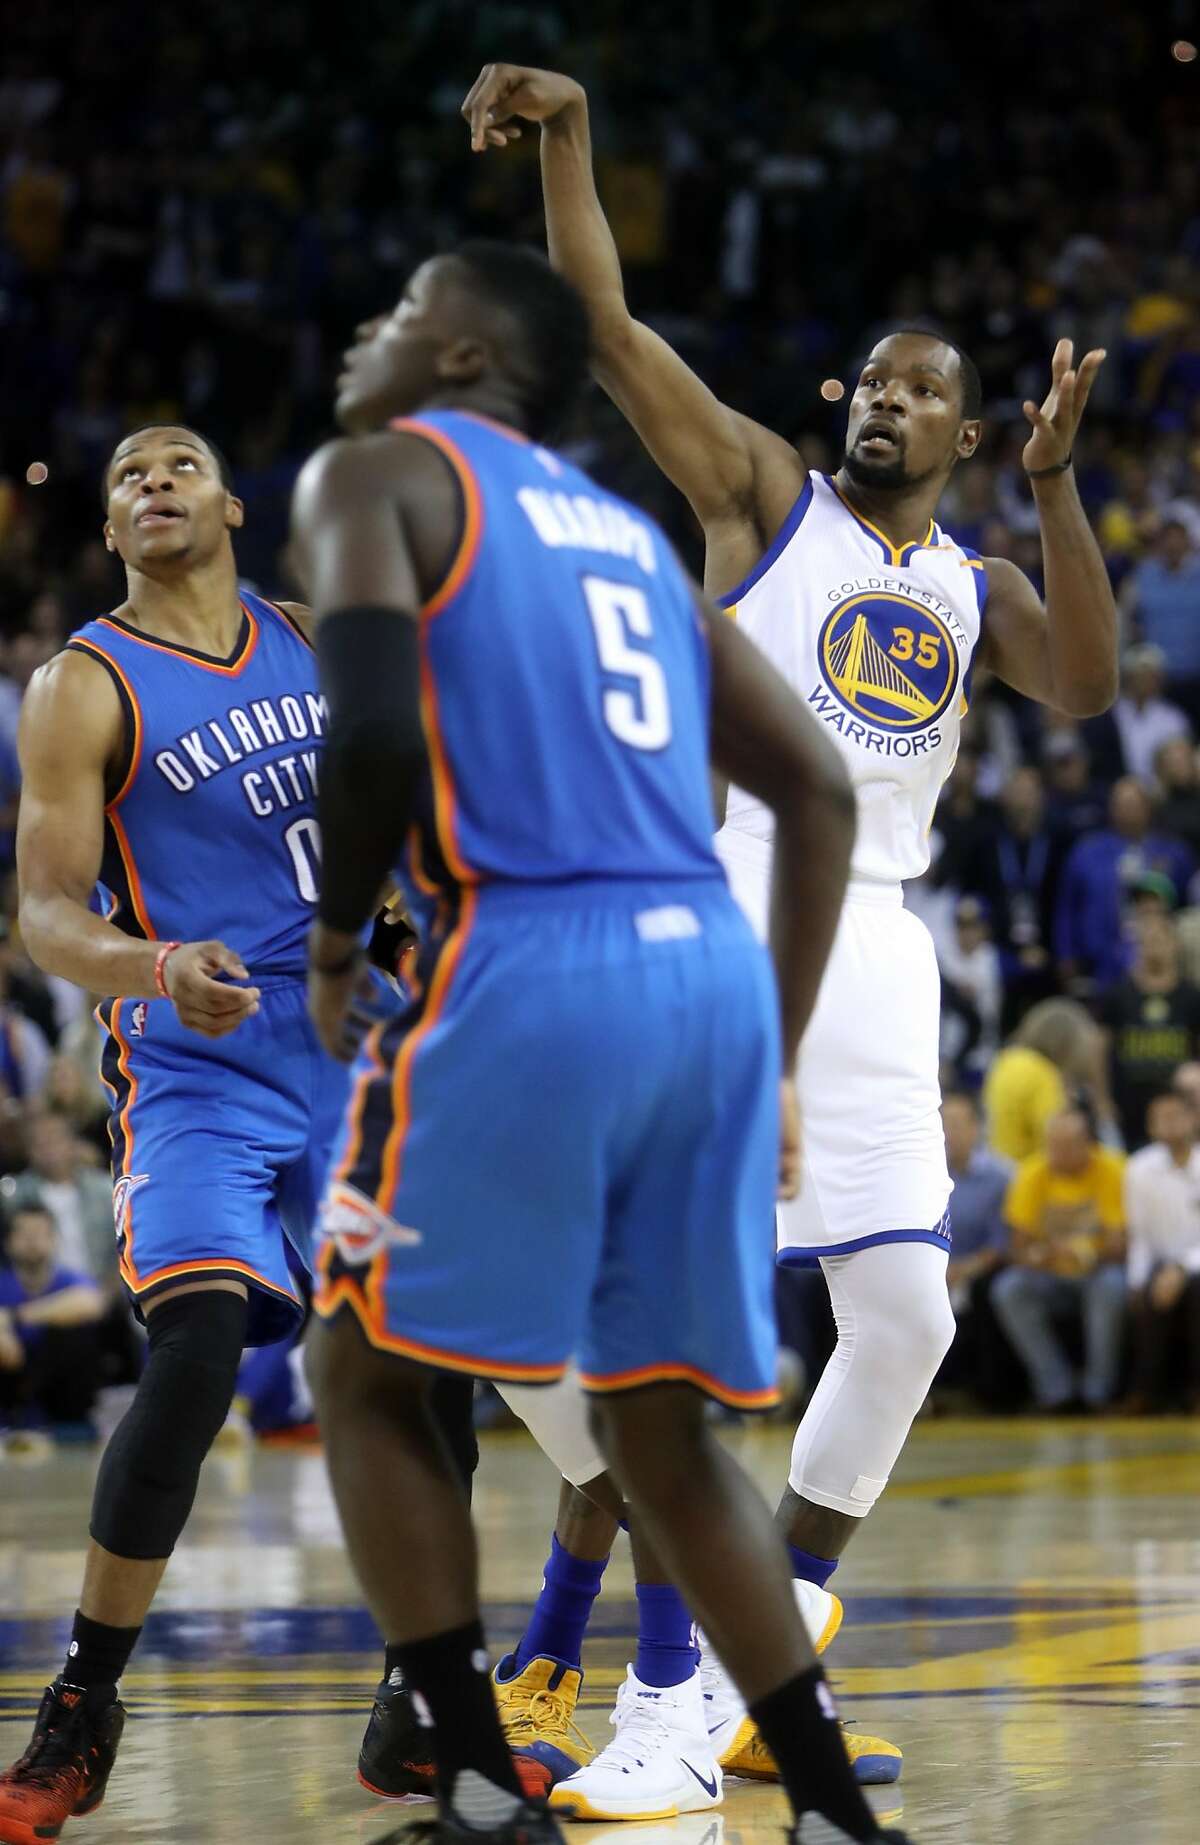 The obituary of Kevin Durant and the Oklahoma City Thunder, by Ben Mallis